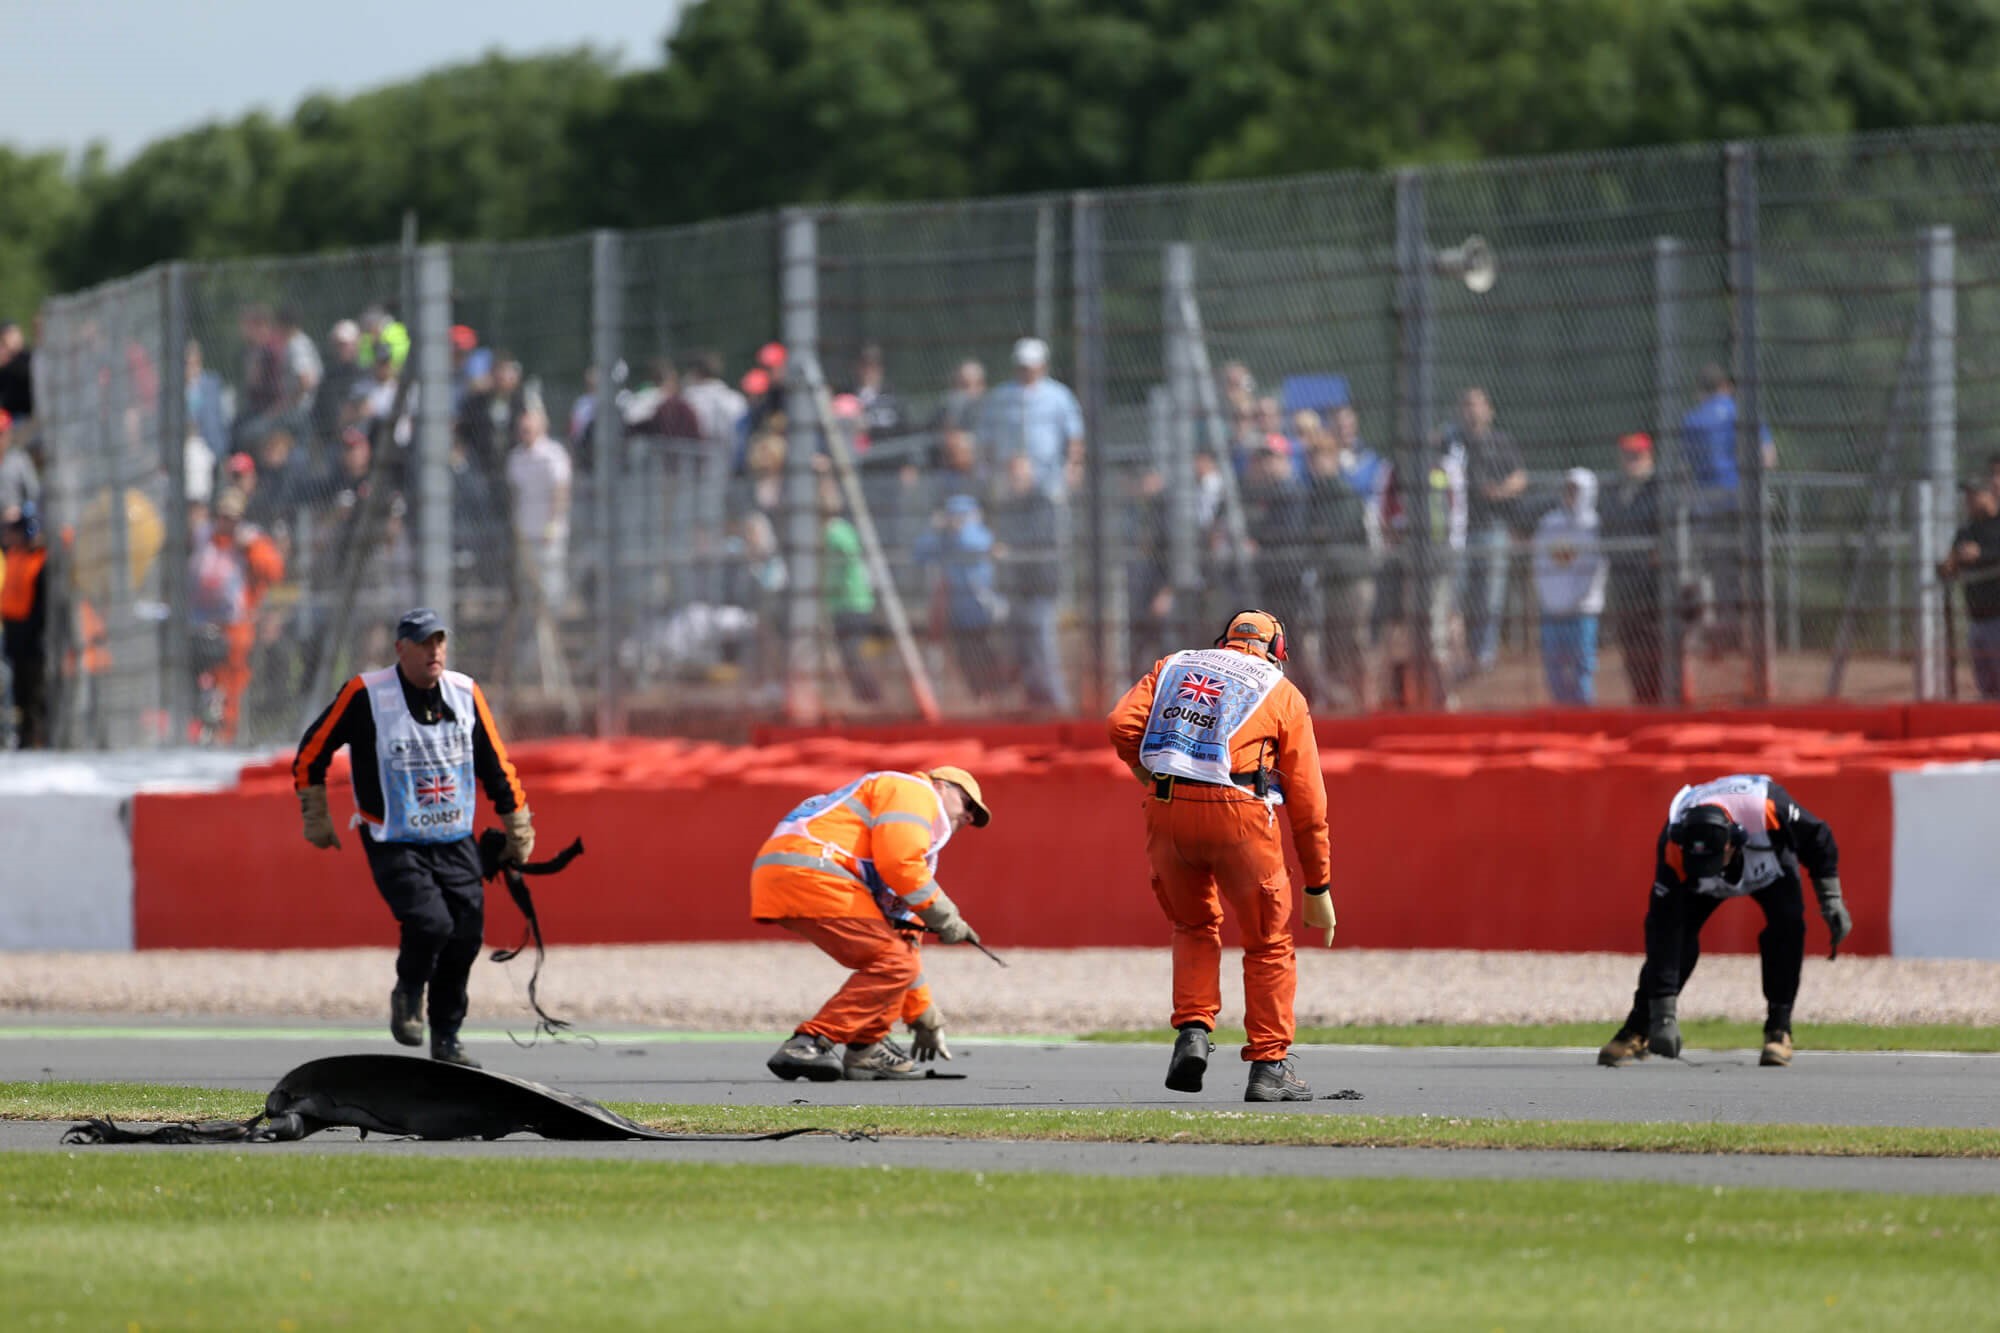 Race marshals in Silverstone.